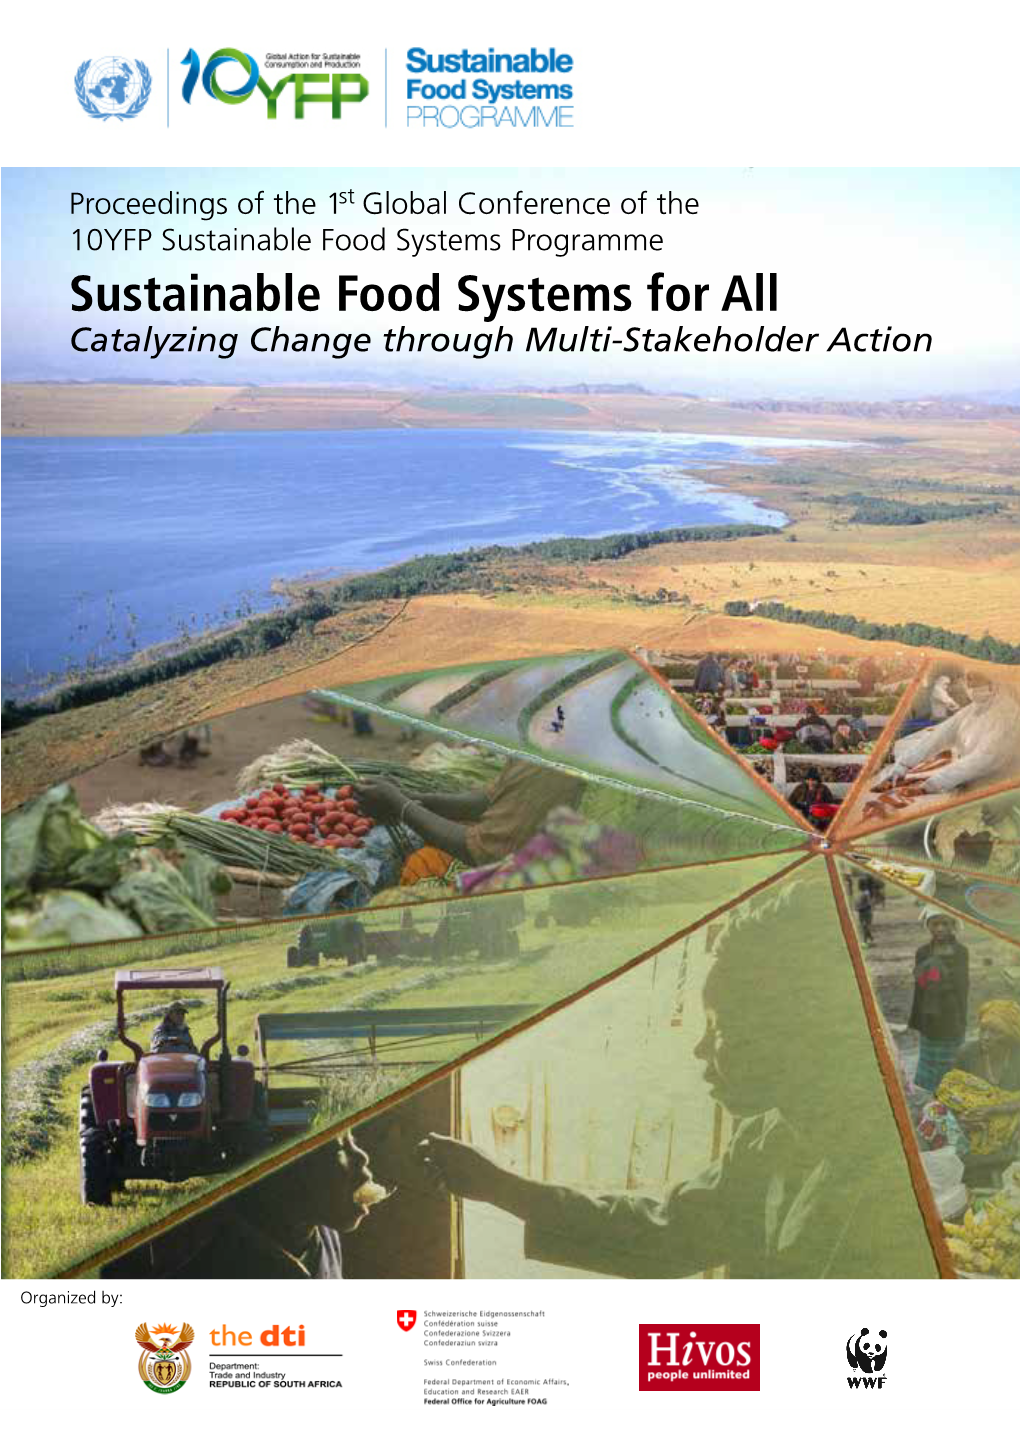 Sustainable Food Systems for All Catalyzing Change Through Multi-Stakeholder Action